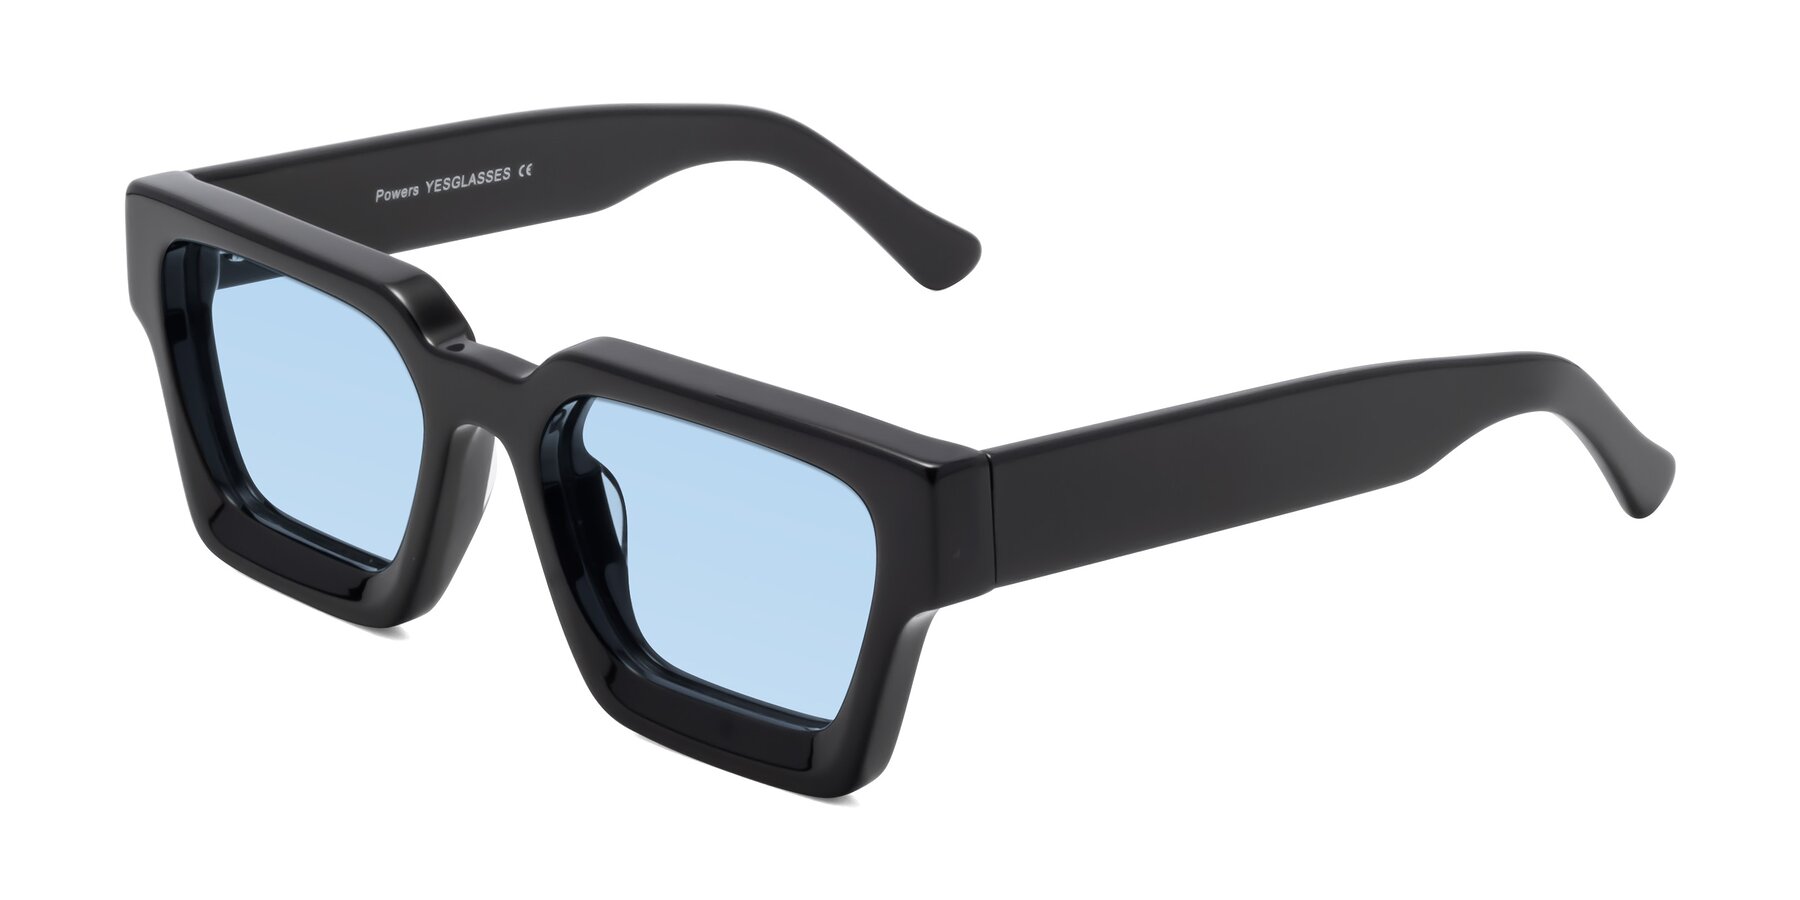 Angle of Powers in Black with Light Blue Tinted Lenses